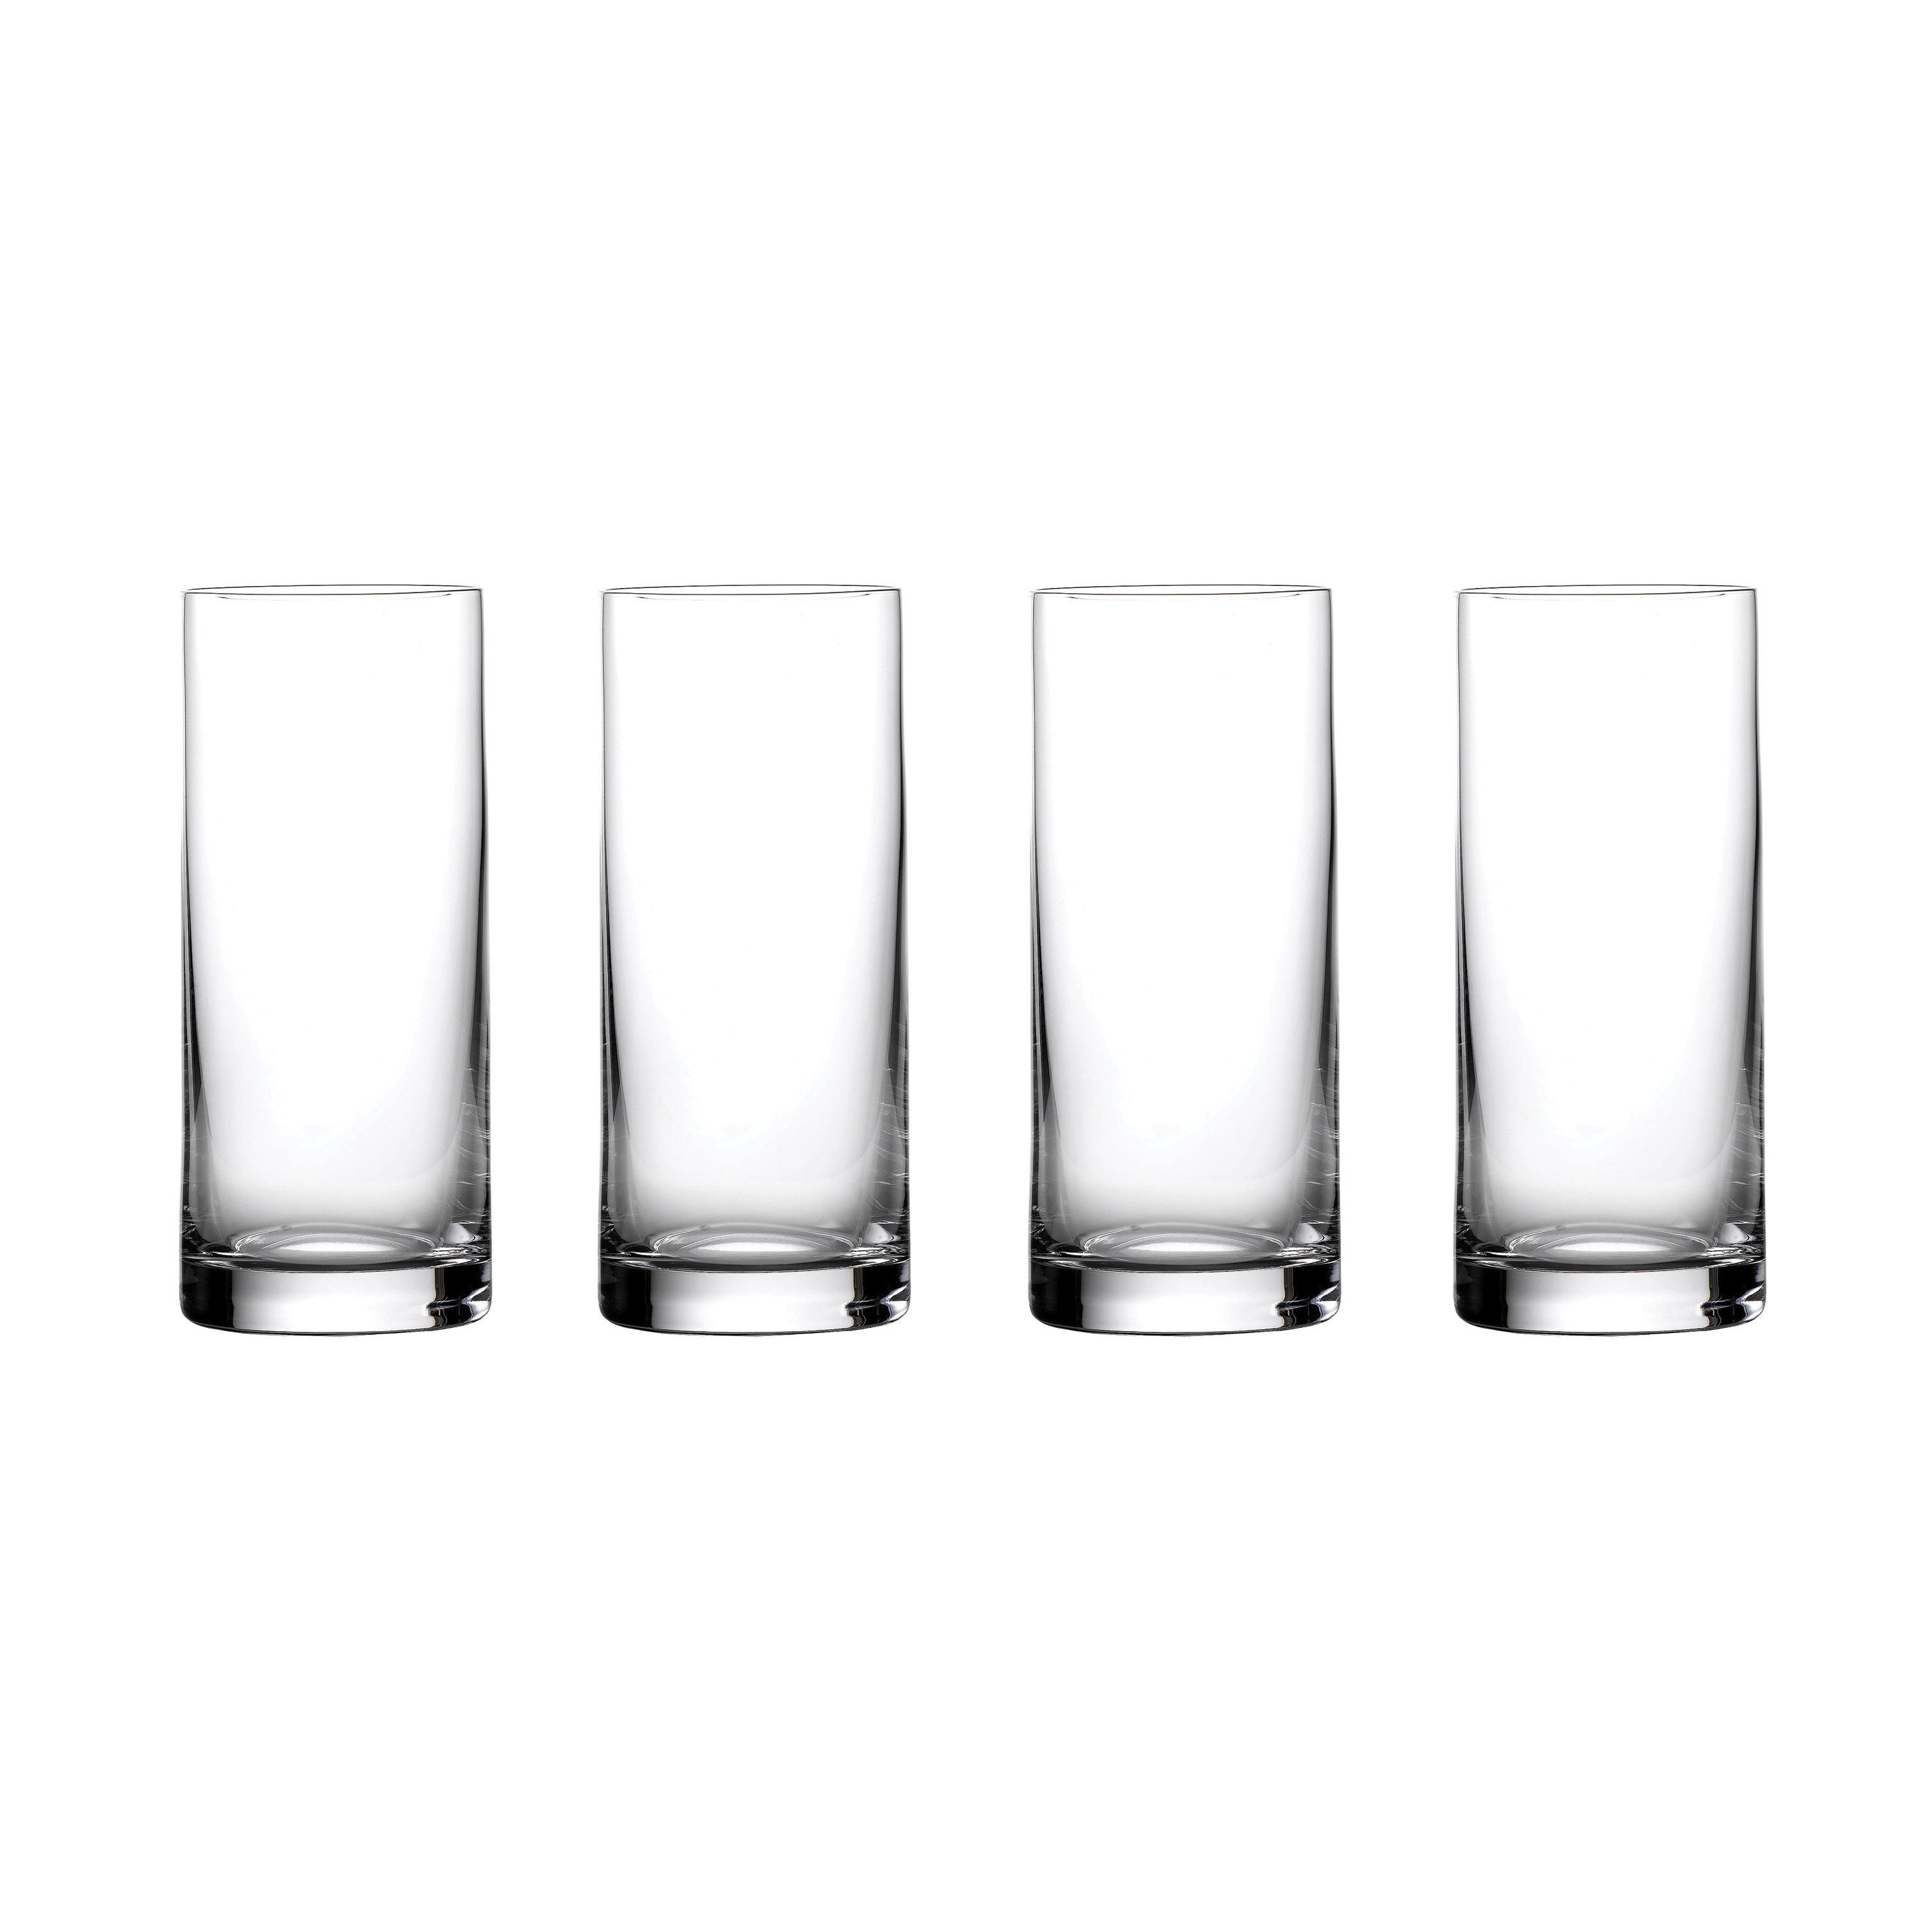 Marquis by Waterford Markham Traditional Crystal Highball Glass - 4 count, 13 oz